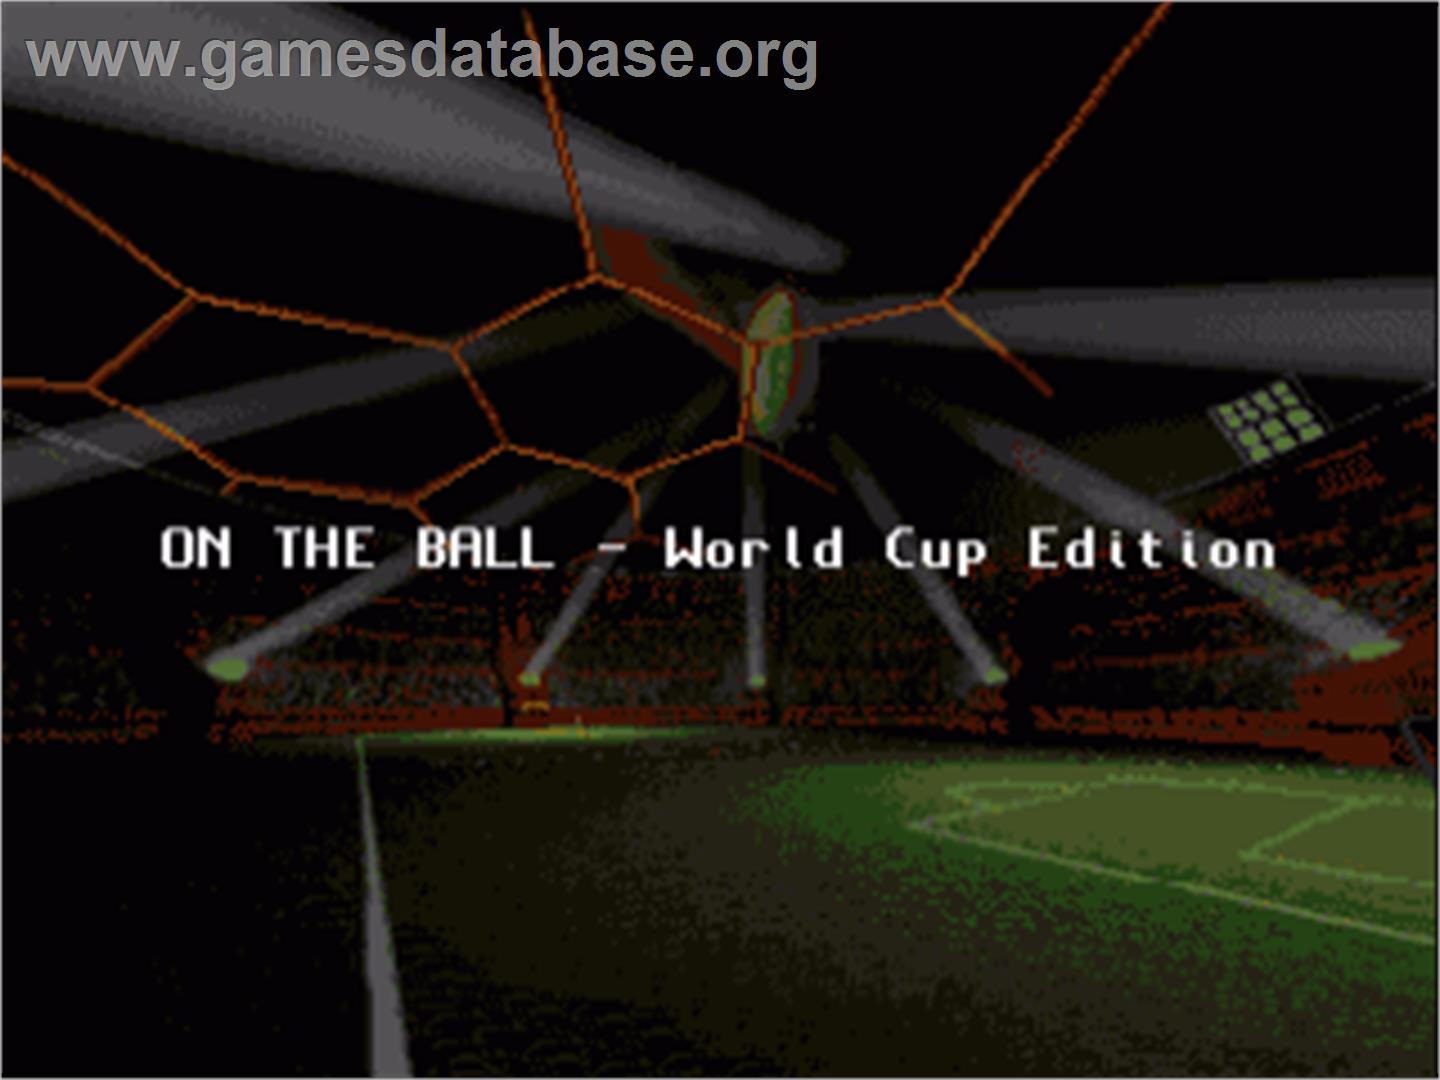 On the Ball: World Cup Edition - Commodore Amiga - Artwork - Title Screen